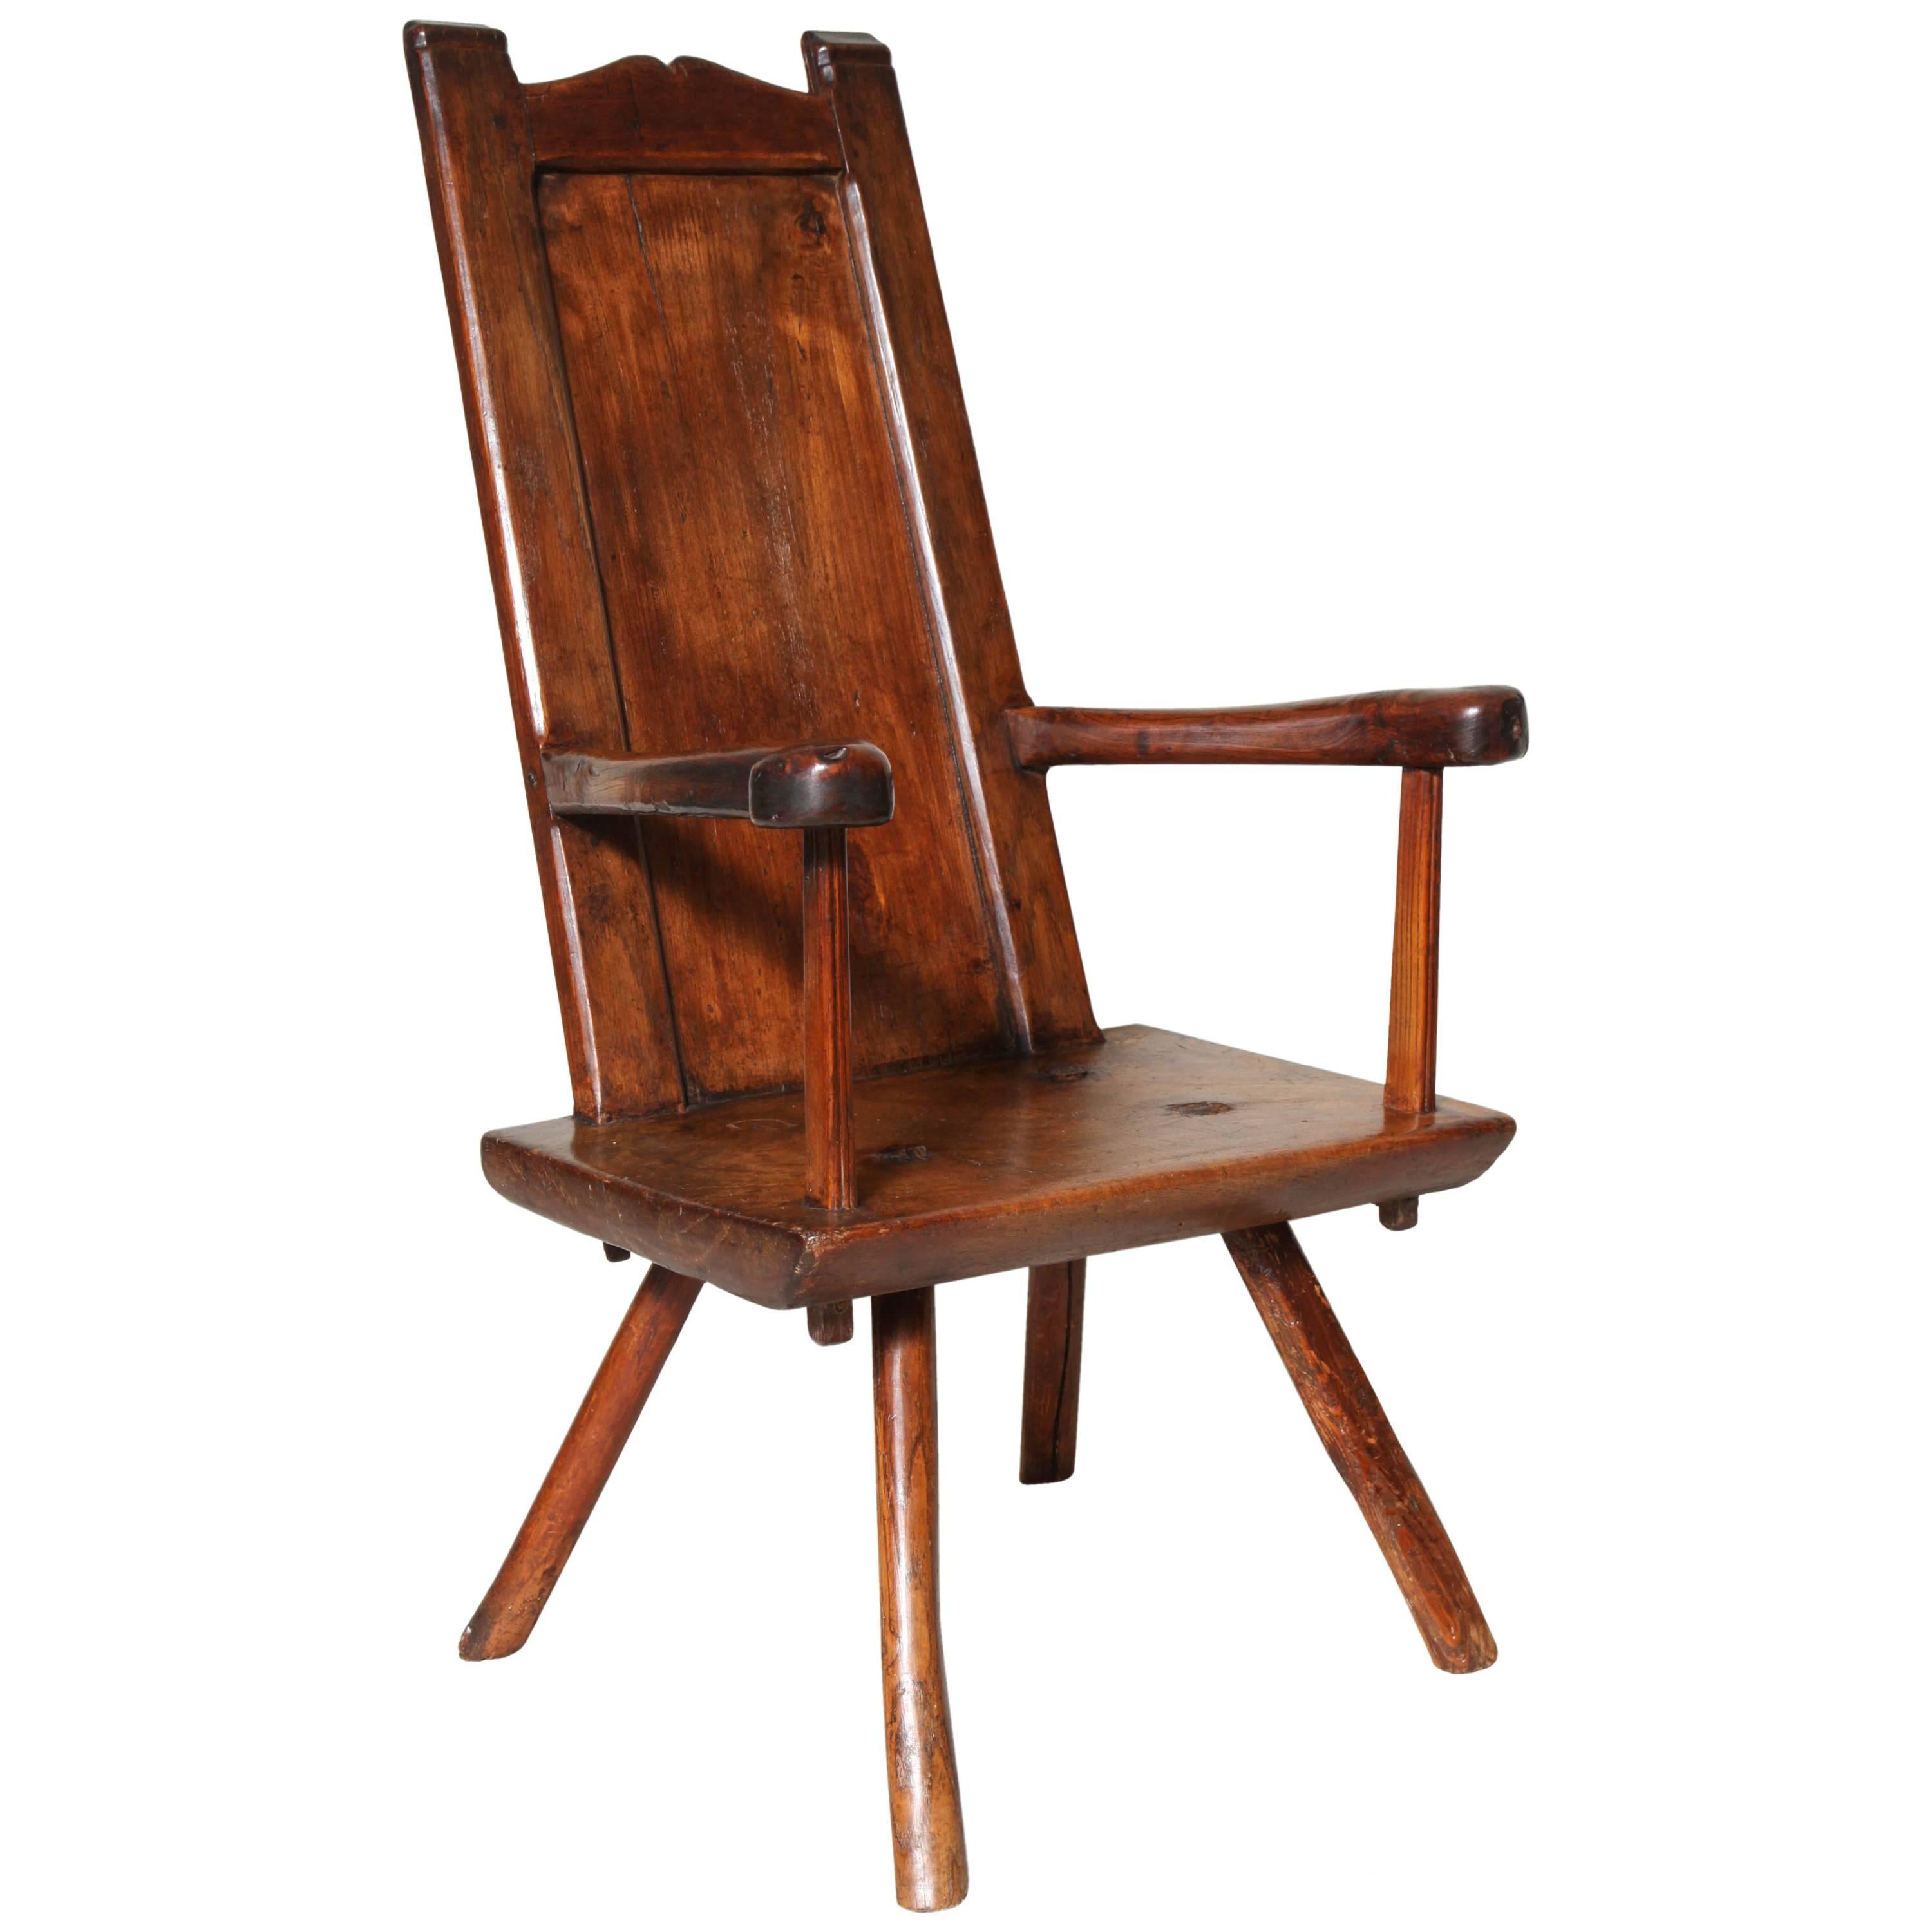 18th or Early 19th Century Shepherd's Chair